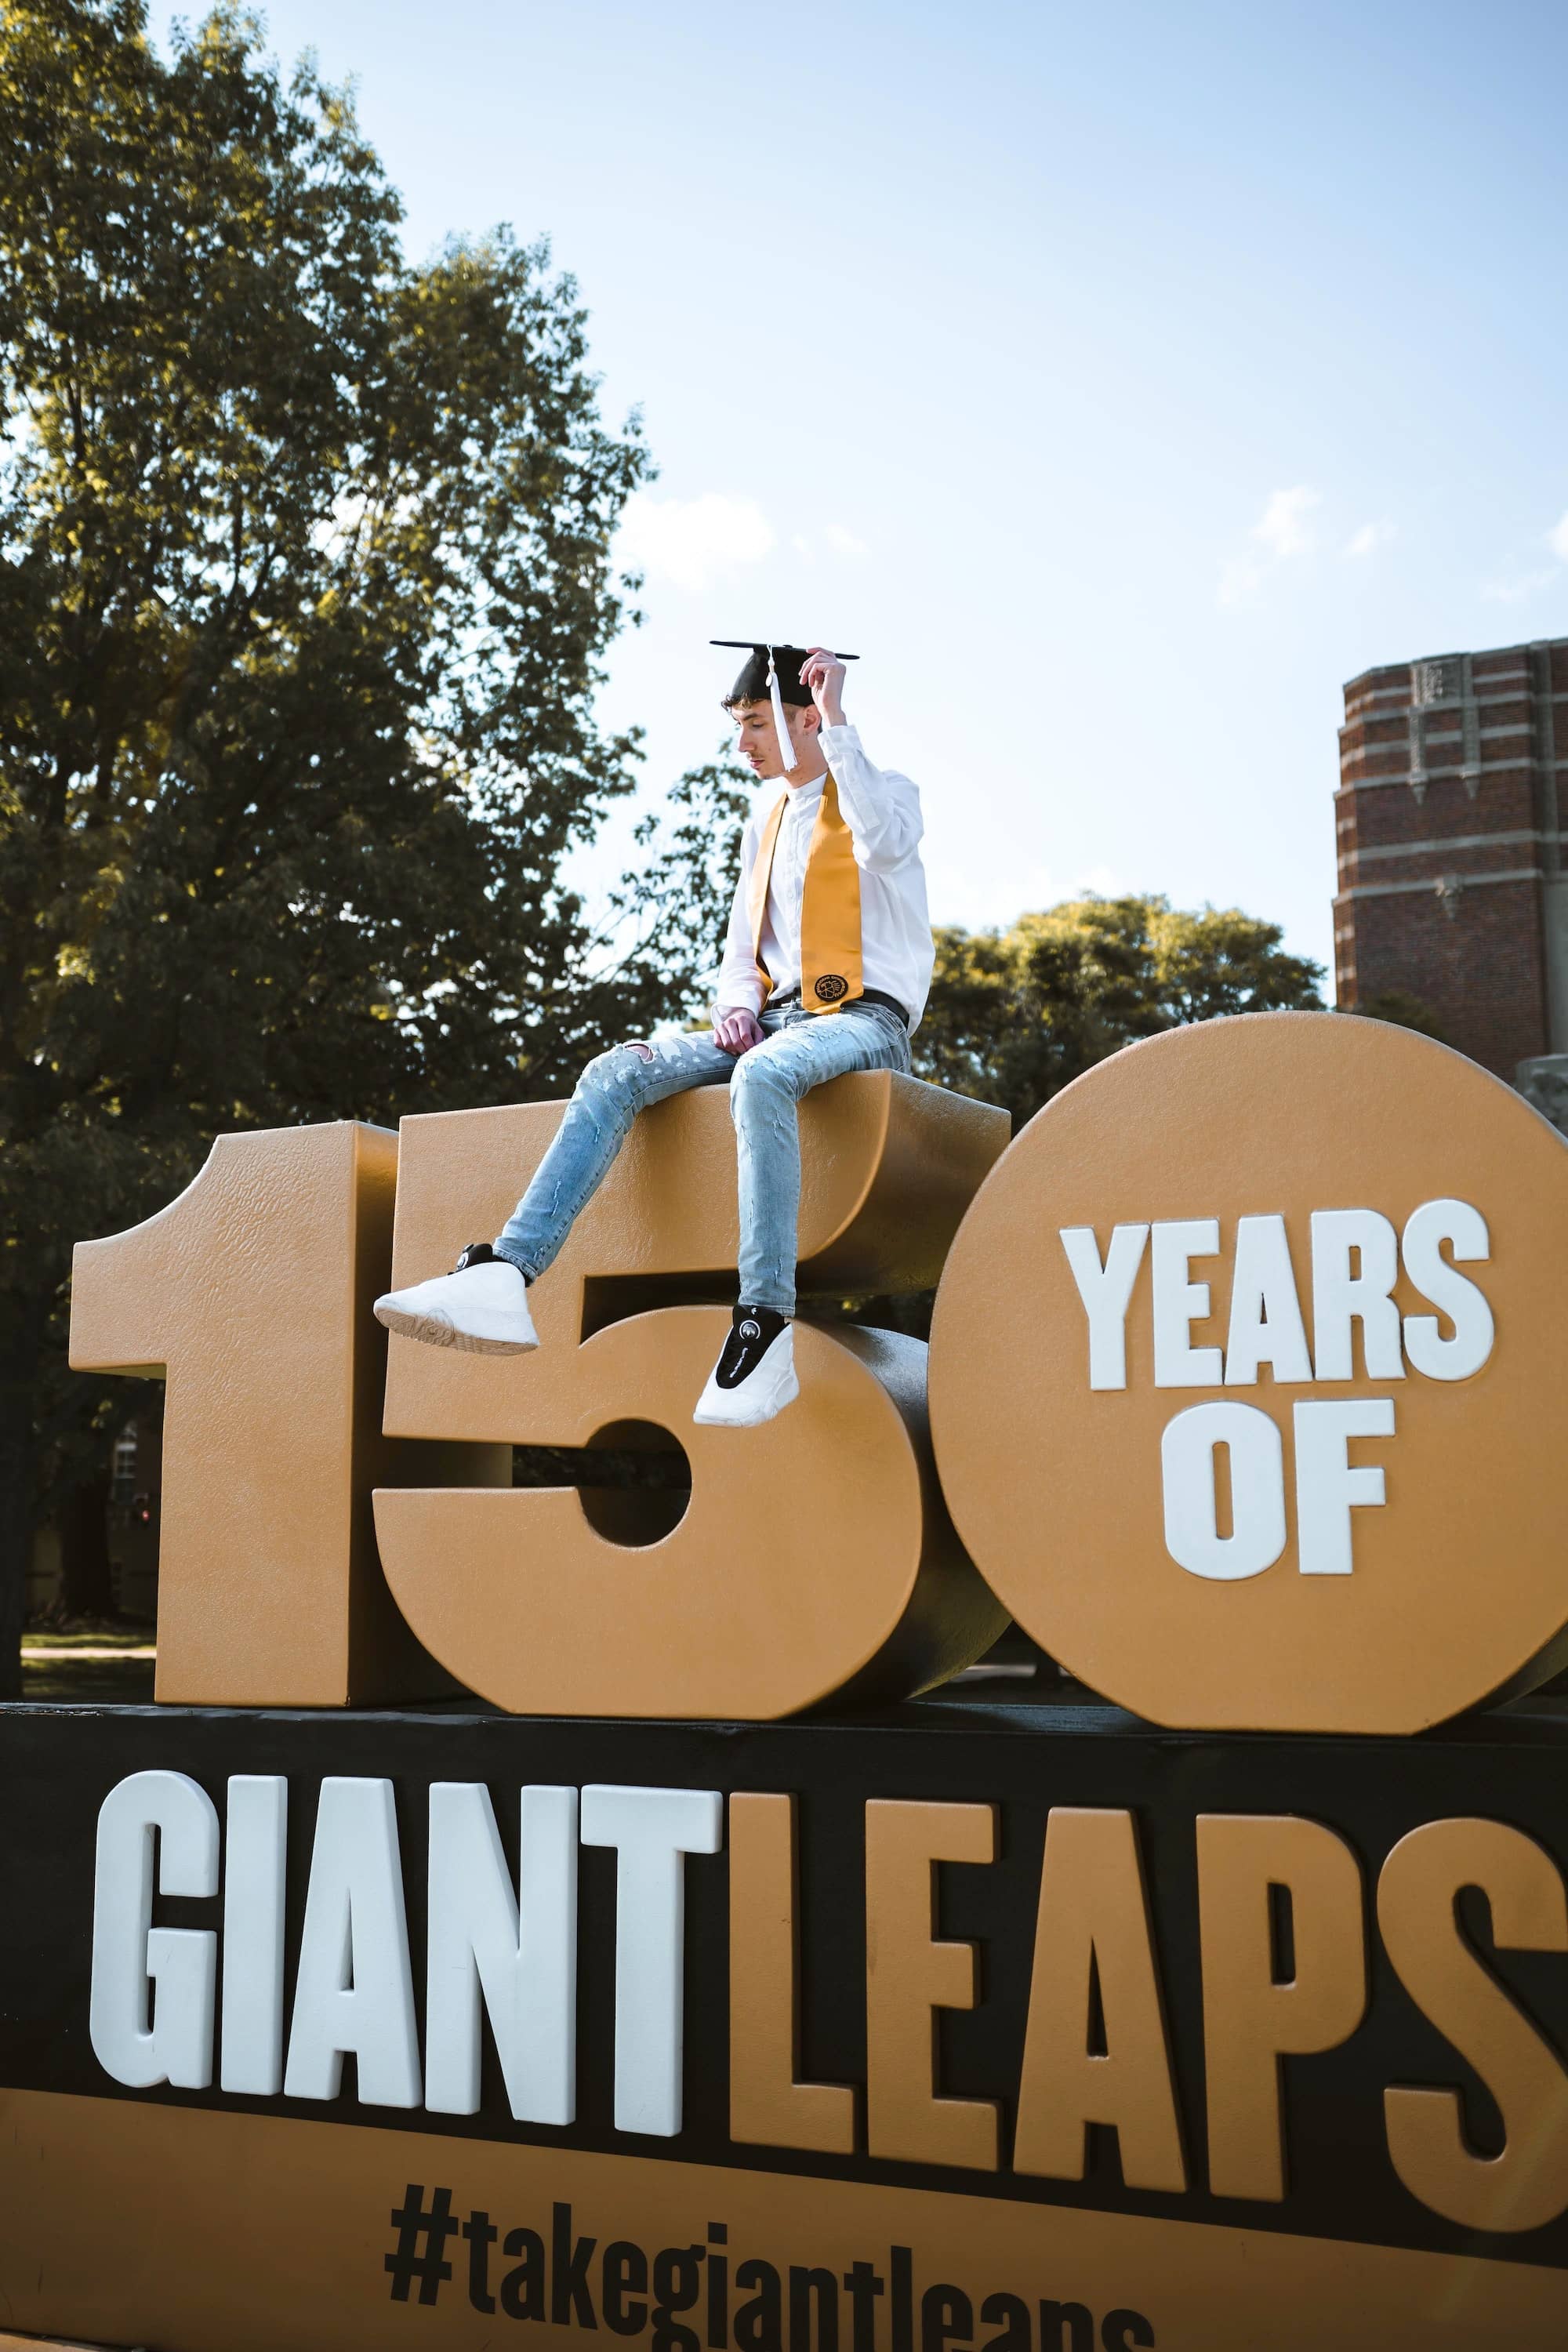 Use the campus or local backdrops for a graduation card announcement